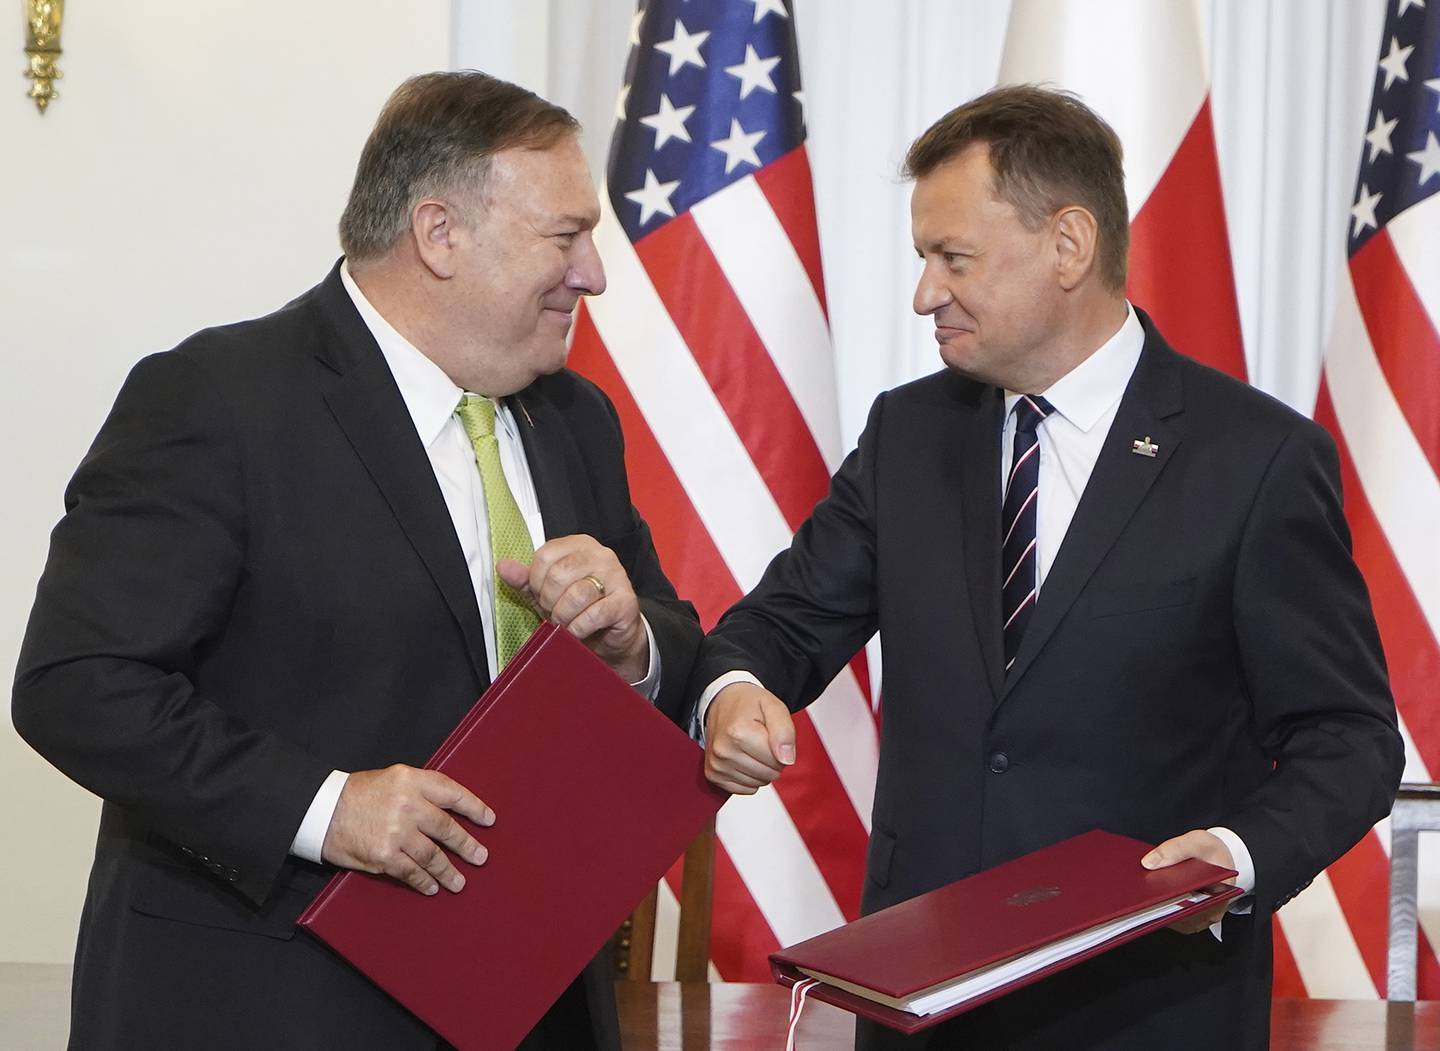 U.S. Secretary of State Mike Pompeo, left, and Poland's Minister of Defence Mariusz Blaszczak greet each other after signing the US-Poland Enhanced Defence Cooperation Agreement in the Presidential Palace in Warsaw,  Poland, Saturday Aug. 15, 2020.